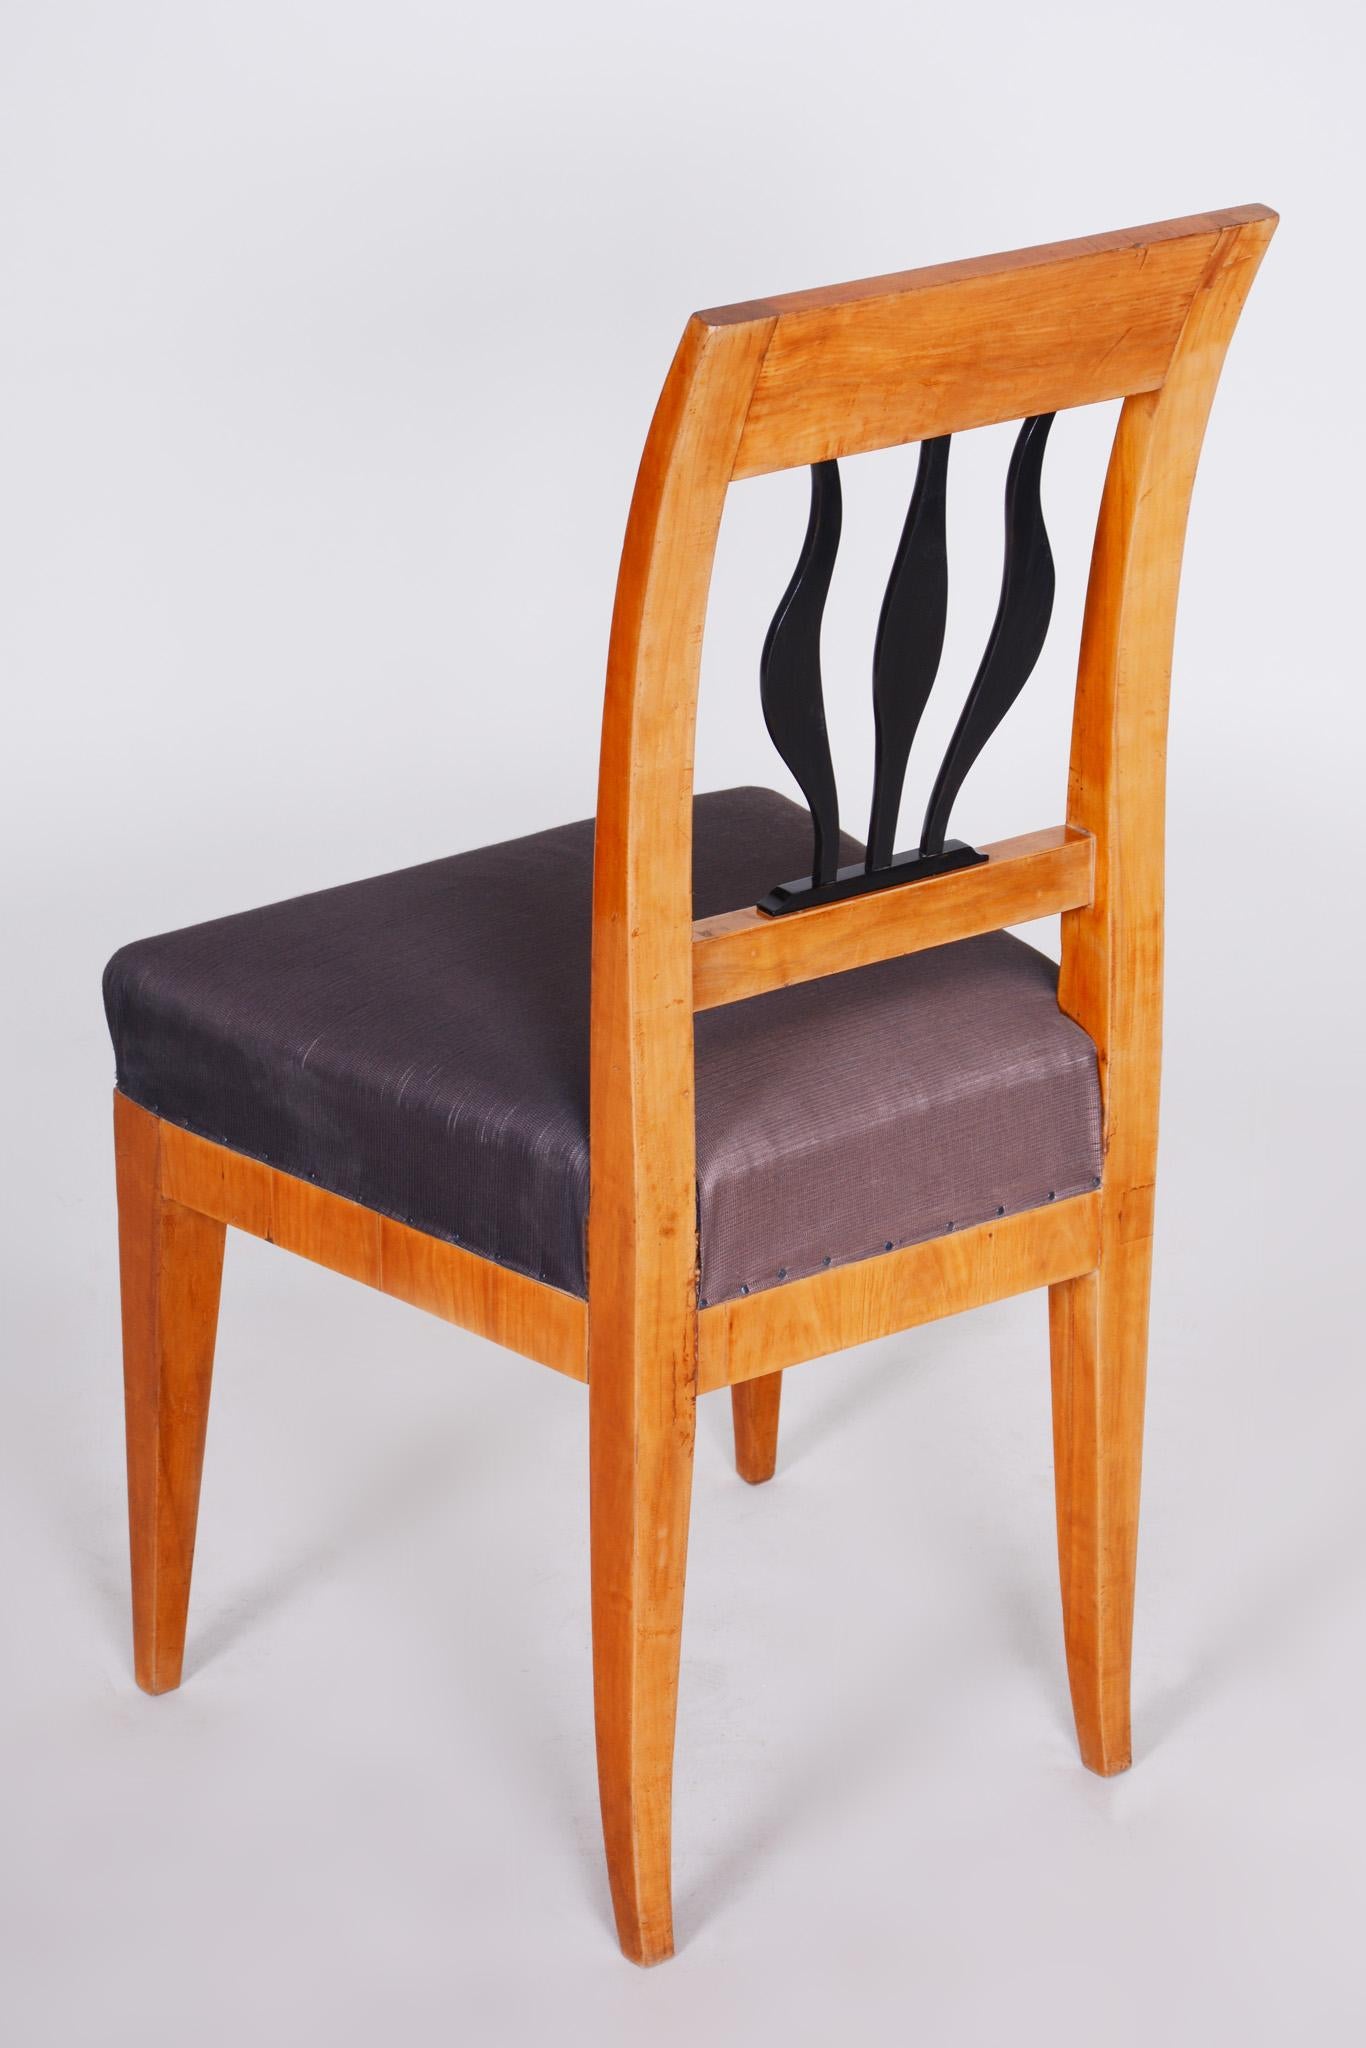 Biedermeir Dining Chair, Made in Czechia 1830s, Restored Cherry Tree For Sale 3